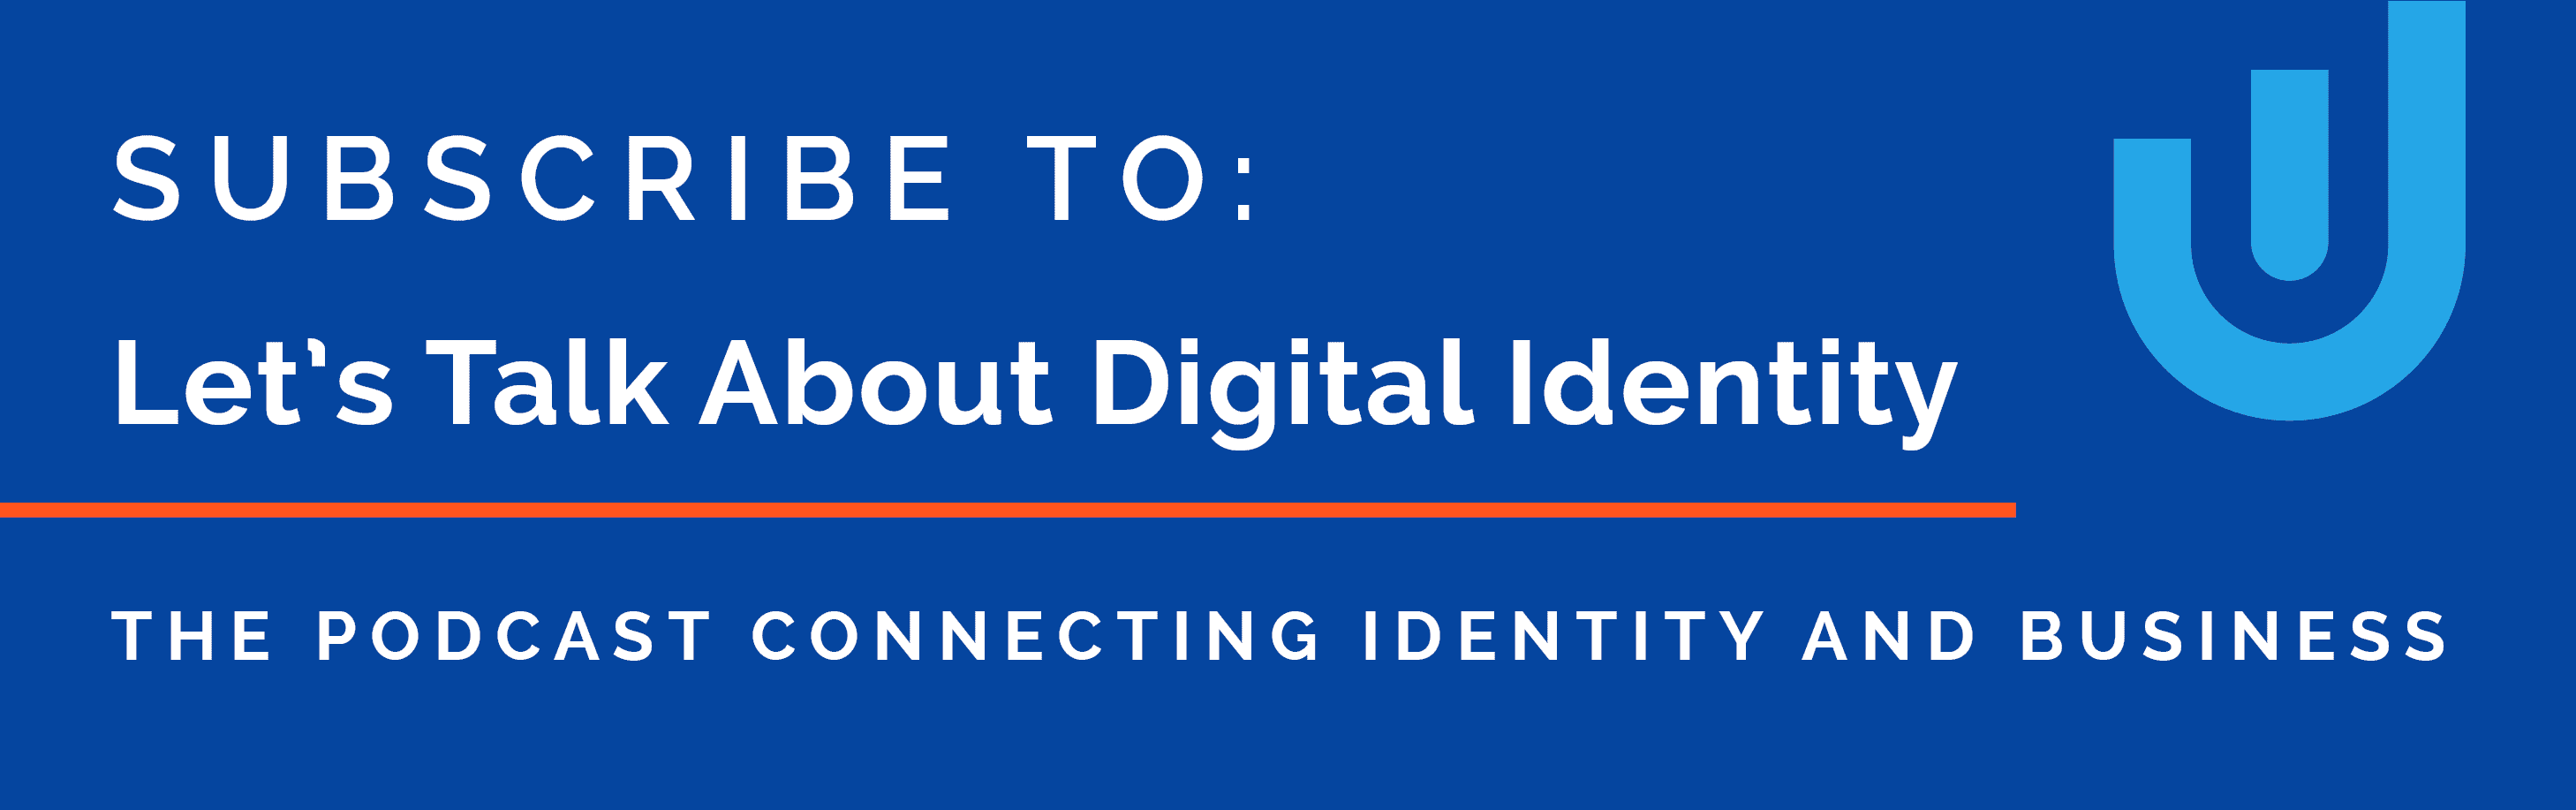 Let's Talk About Digital Identity Podcast